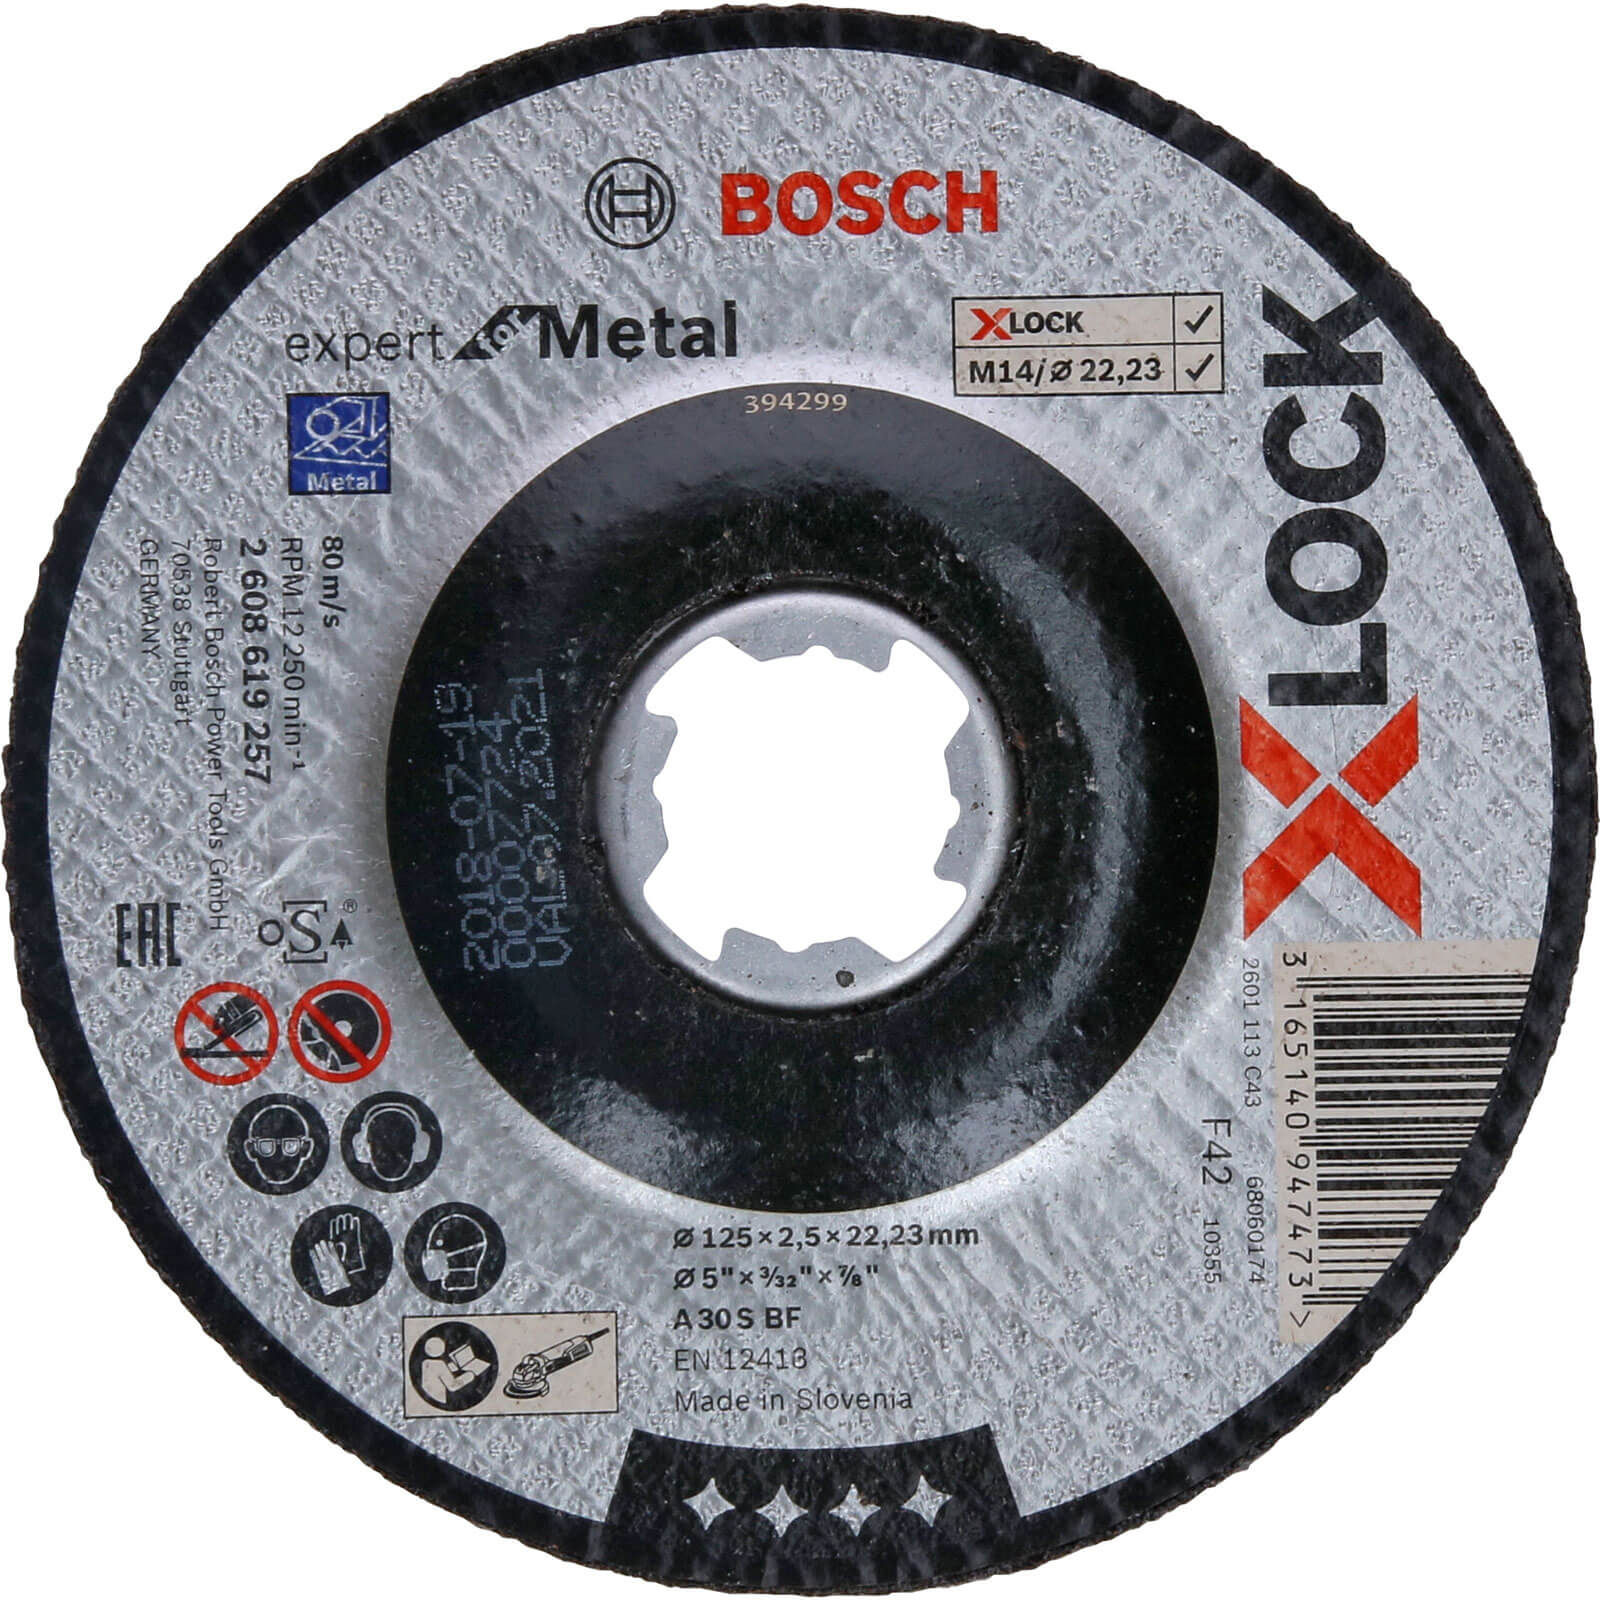 Bosch Expert X Lock Depressed Centre Cutting Disc for Metal 125mm 2.5mm 22mm